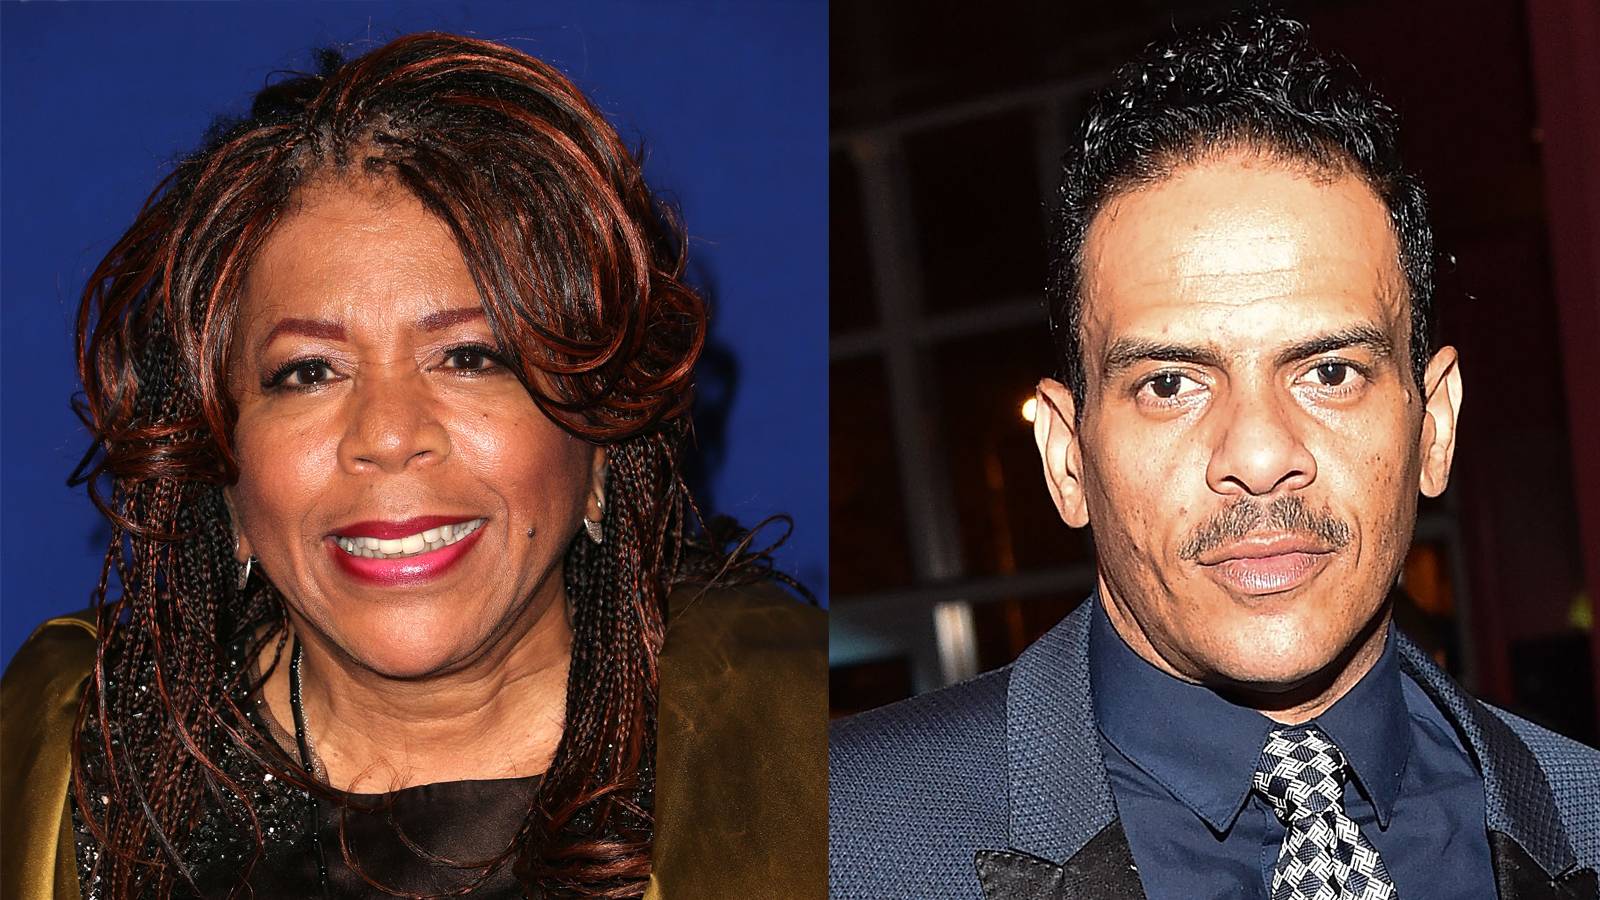 Next Week on Lift Every Voice: Christopher Williams and Valerie Simpson  - Lift Every Voice presents Christopher Williams and Valerie Simpson. (Photos from left: Frederick M. Brown/Getty Images,Paras Griffin/Getty Images)